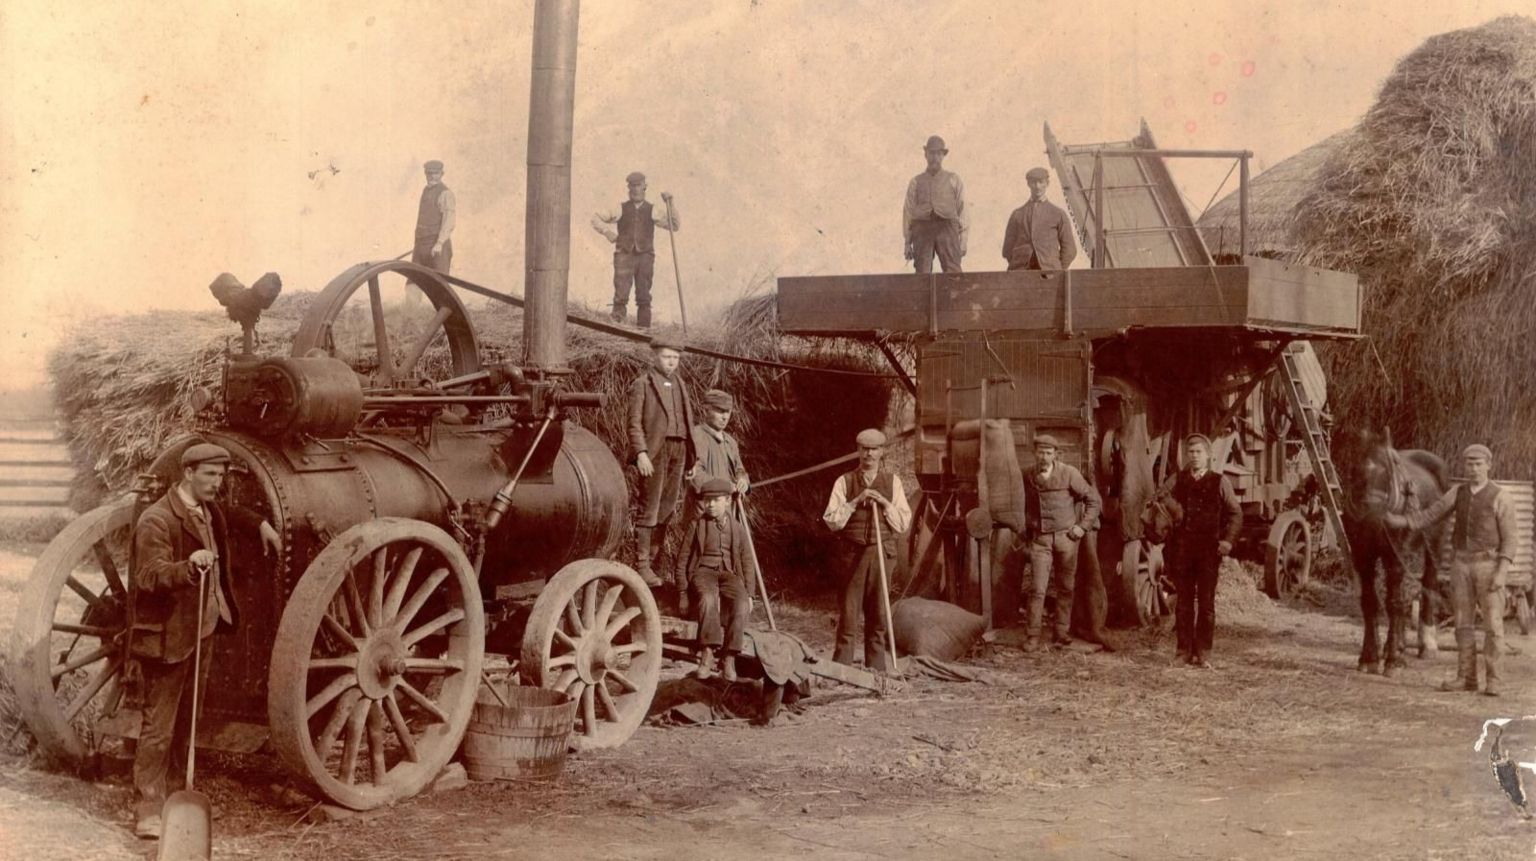 East Riding farm labourers’ early 20th century